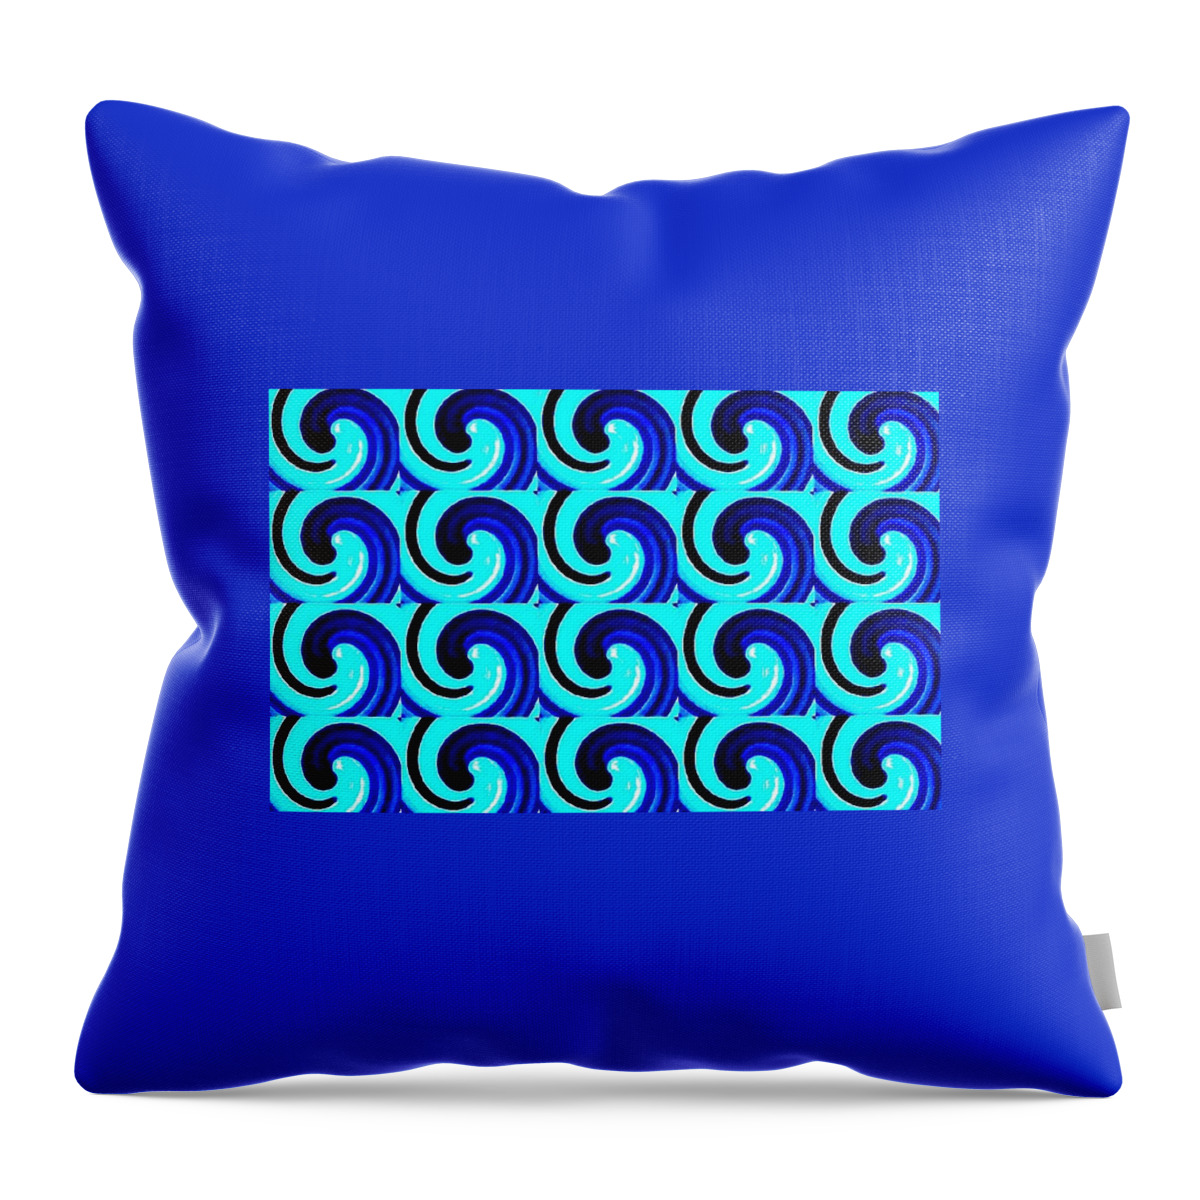 Serious Art Design By A.r.johnson Throw Pillow featuring the digital art Blue Green Wave by Andrew Johnson